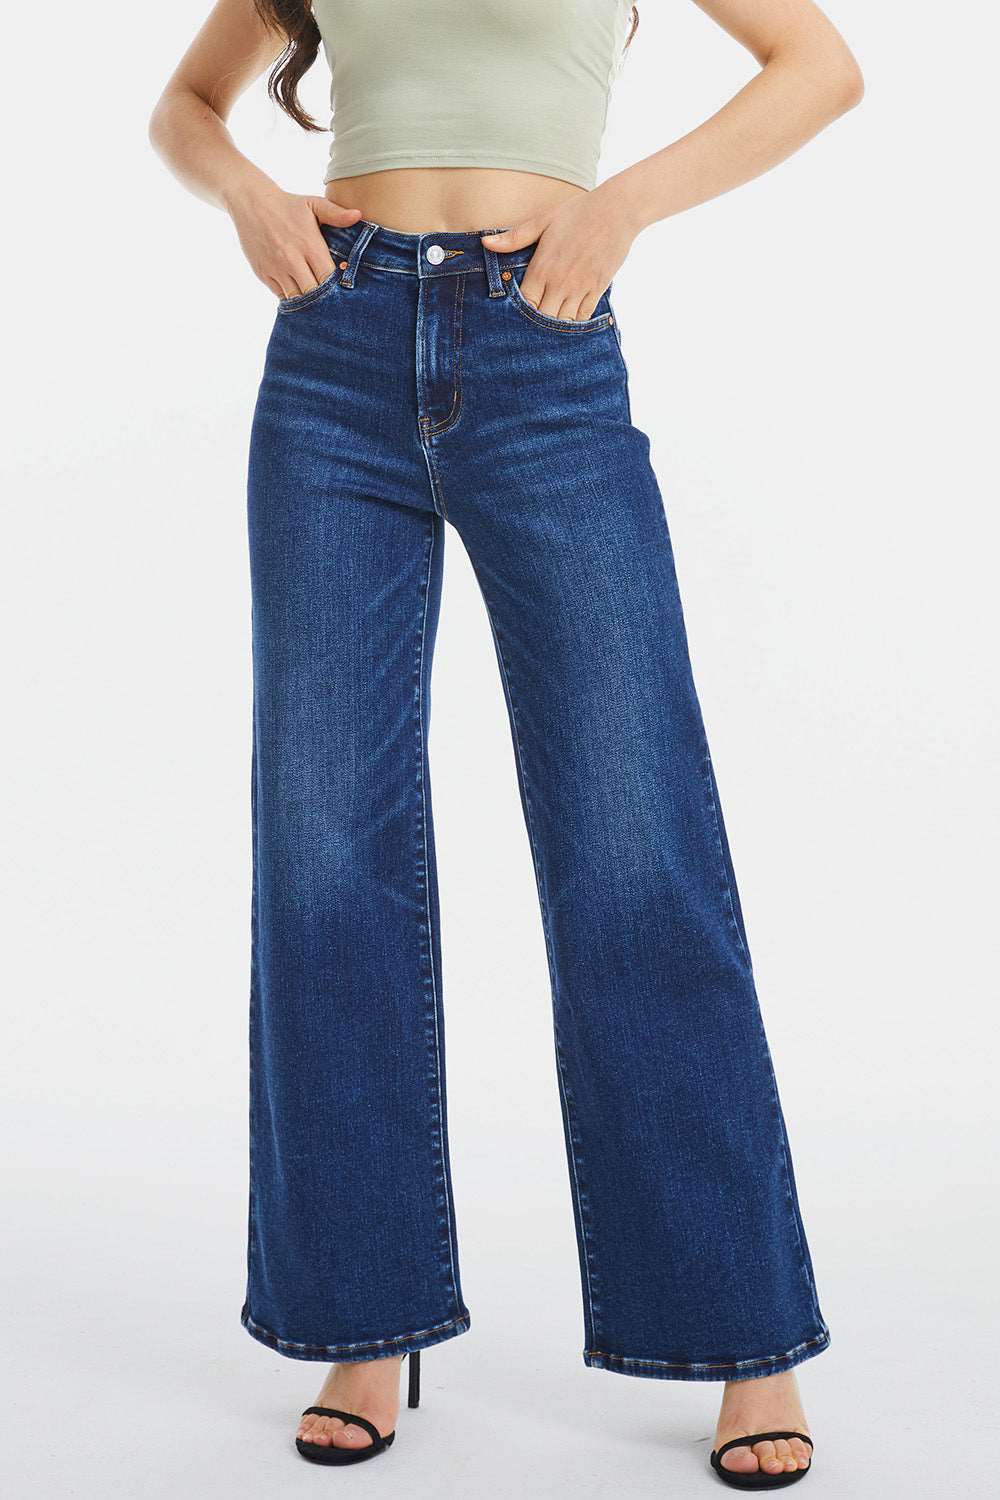 BAYEAS Full Size High Waist Cat's Whisker Wide Leg Jeans apparel & accessories